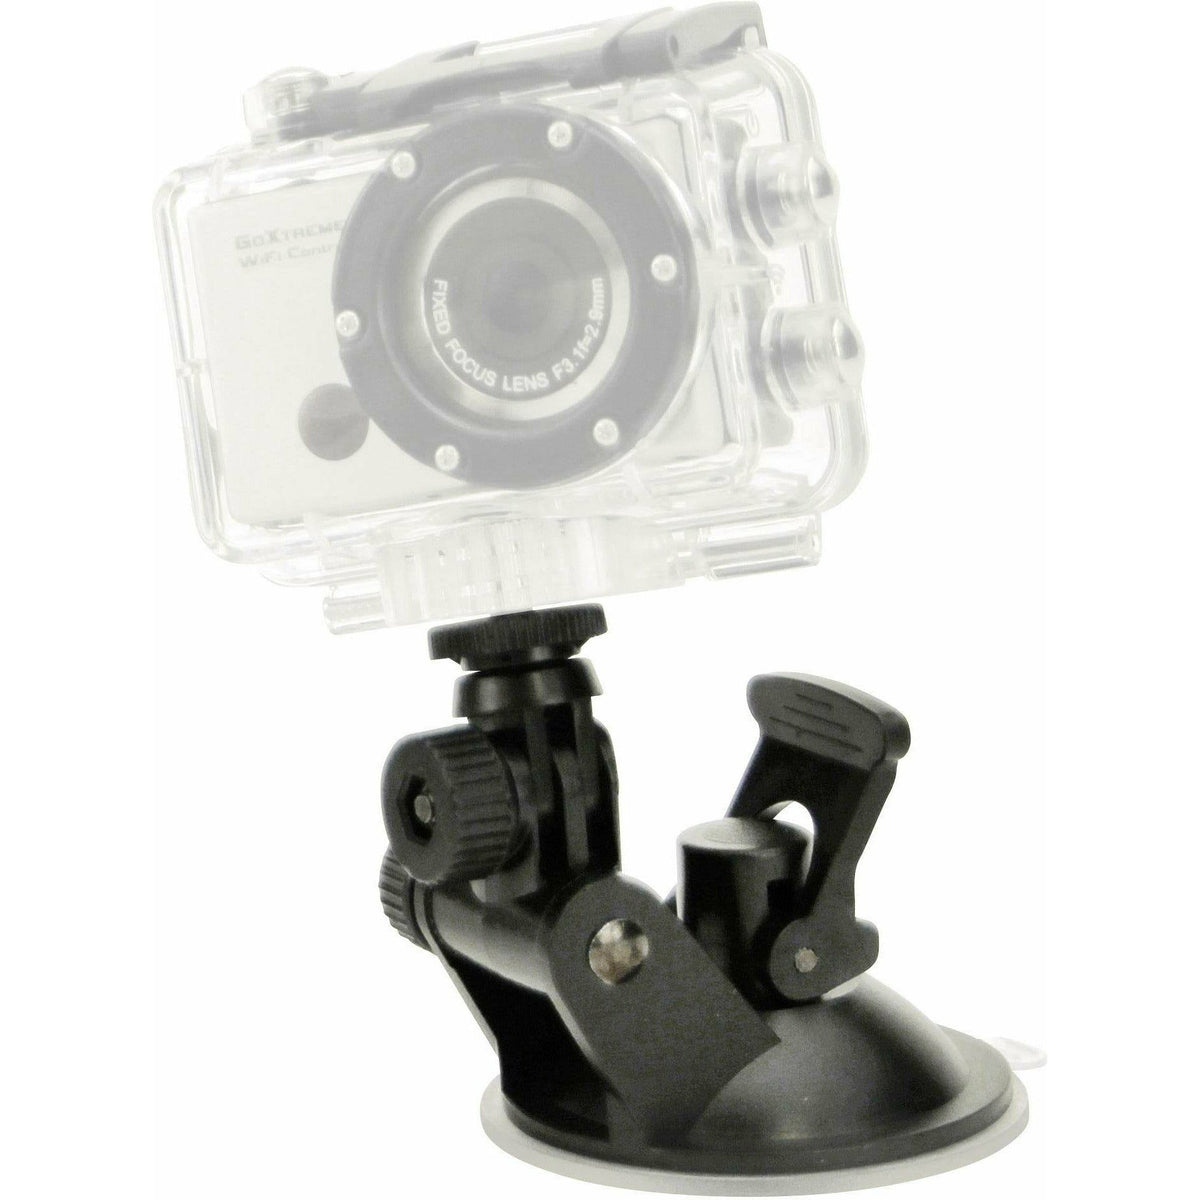 GoXtreme Car-Suction-Mount Cup Holder for Action Cams - Black | 55202 (7557629935804)